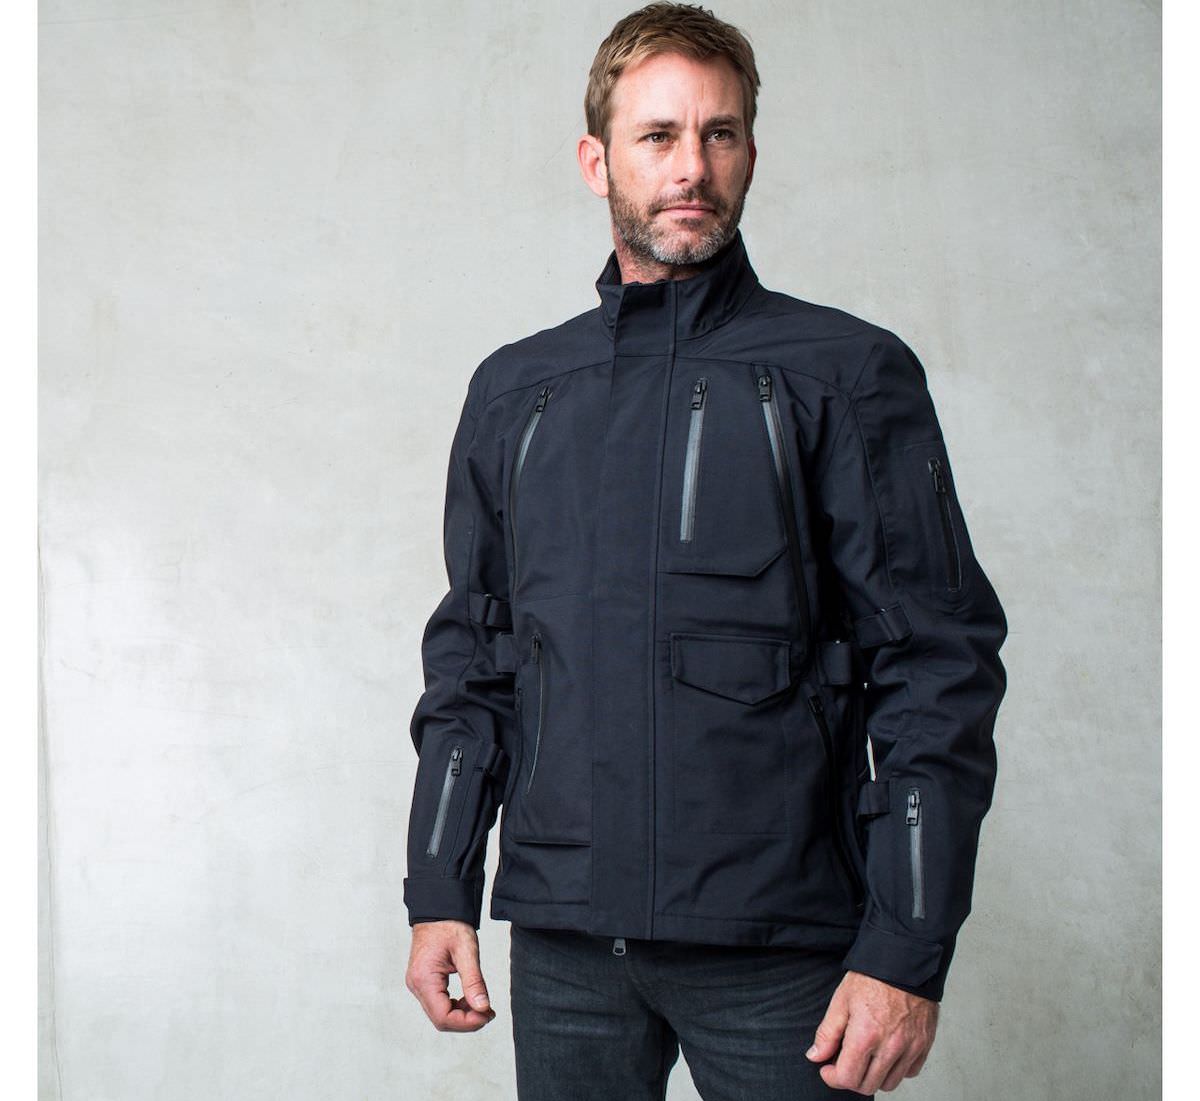 Aether Expedition Jacket - A Motorcycle Jacket To Cross Continents, Or ...